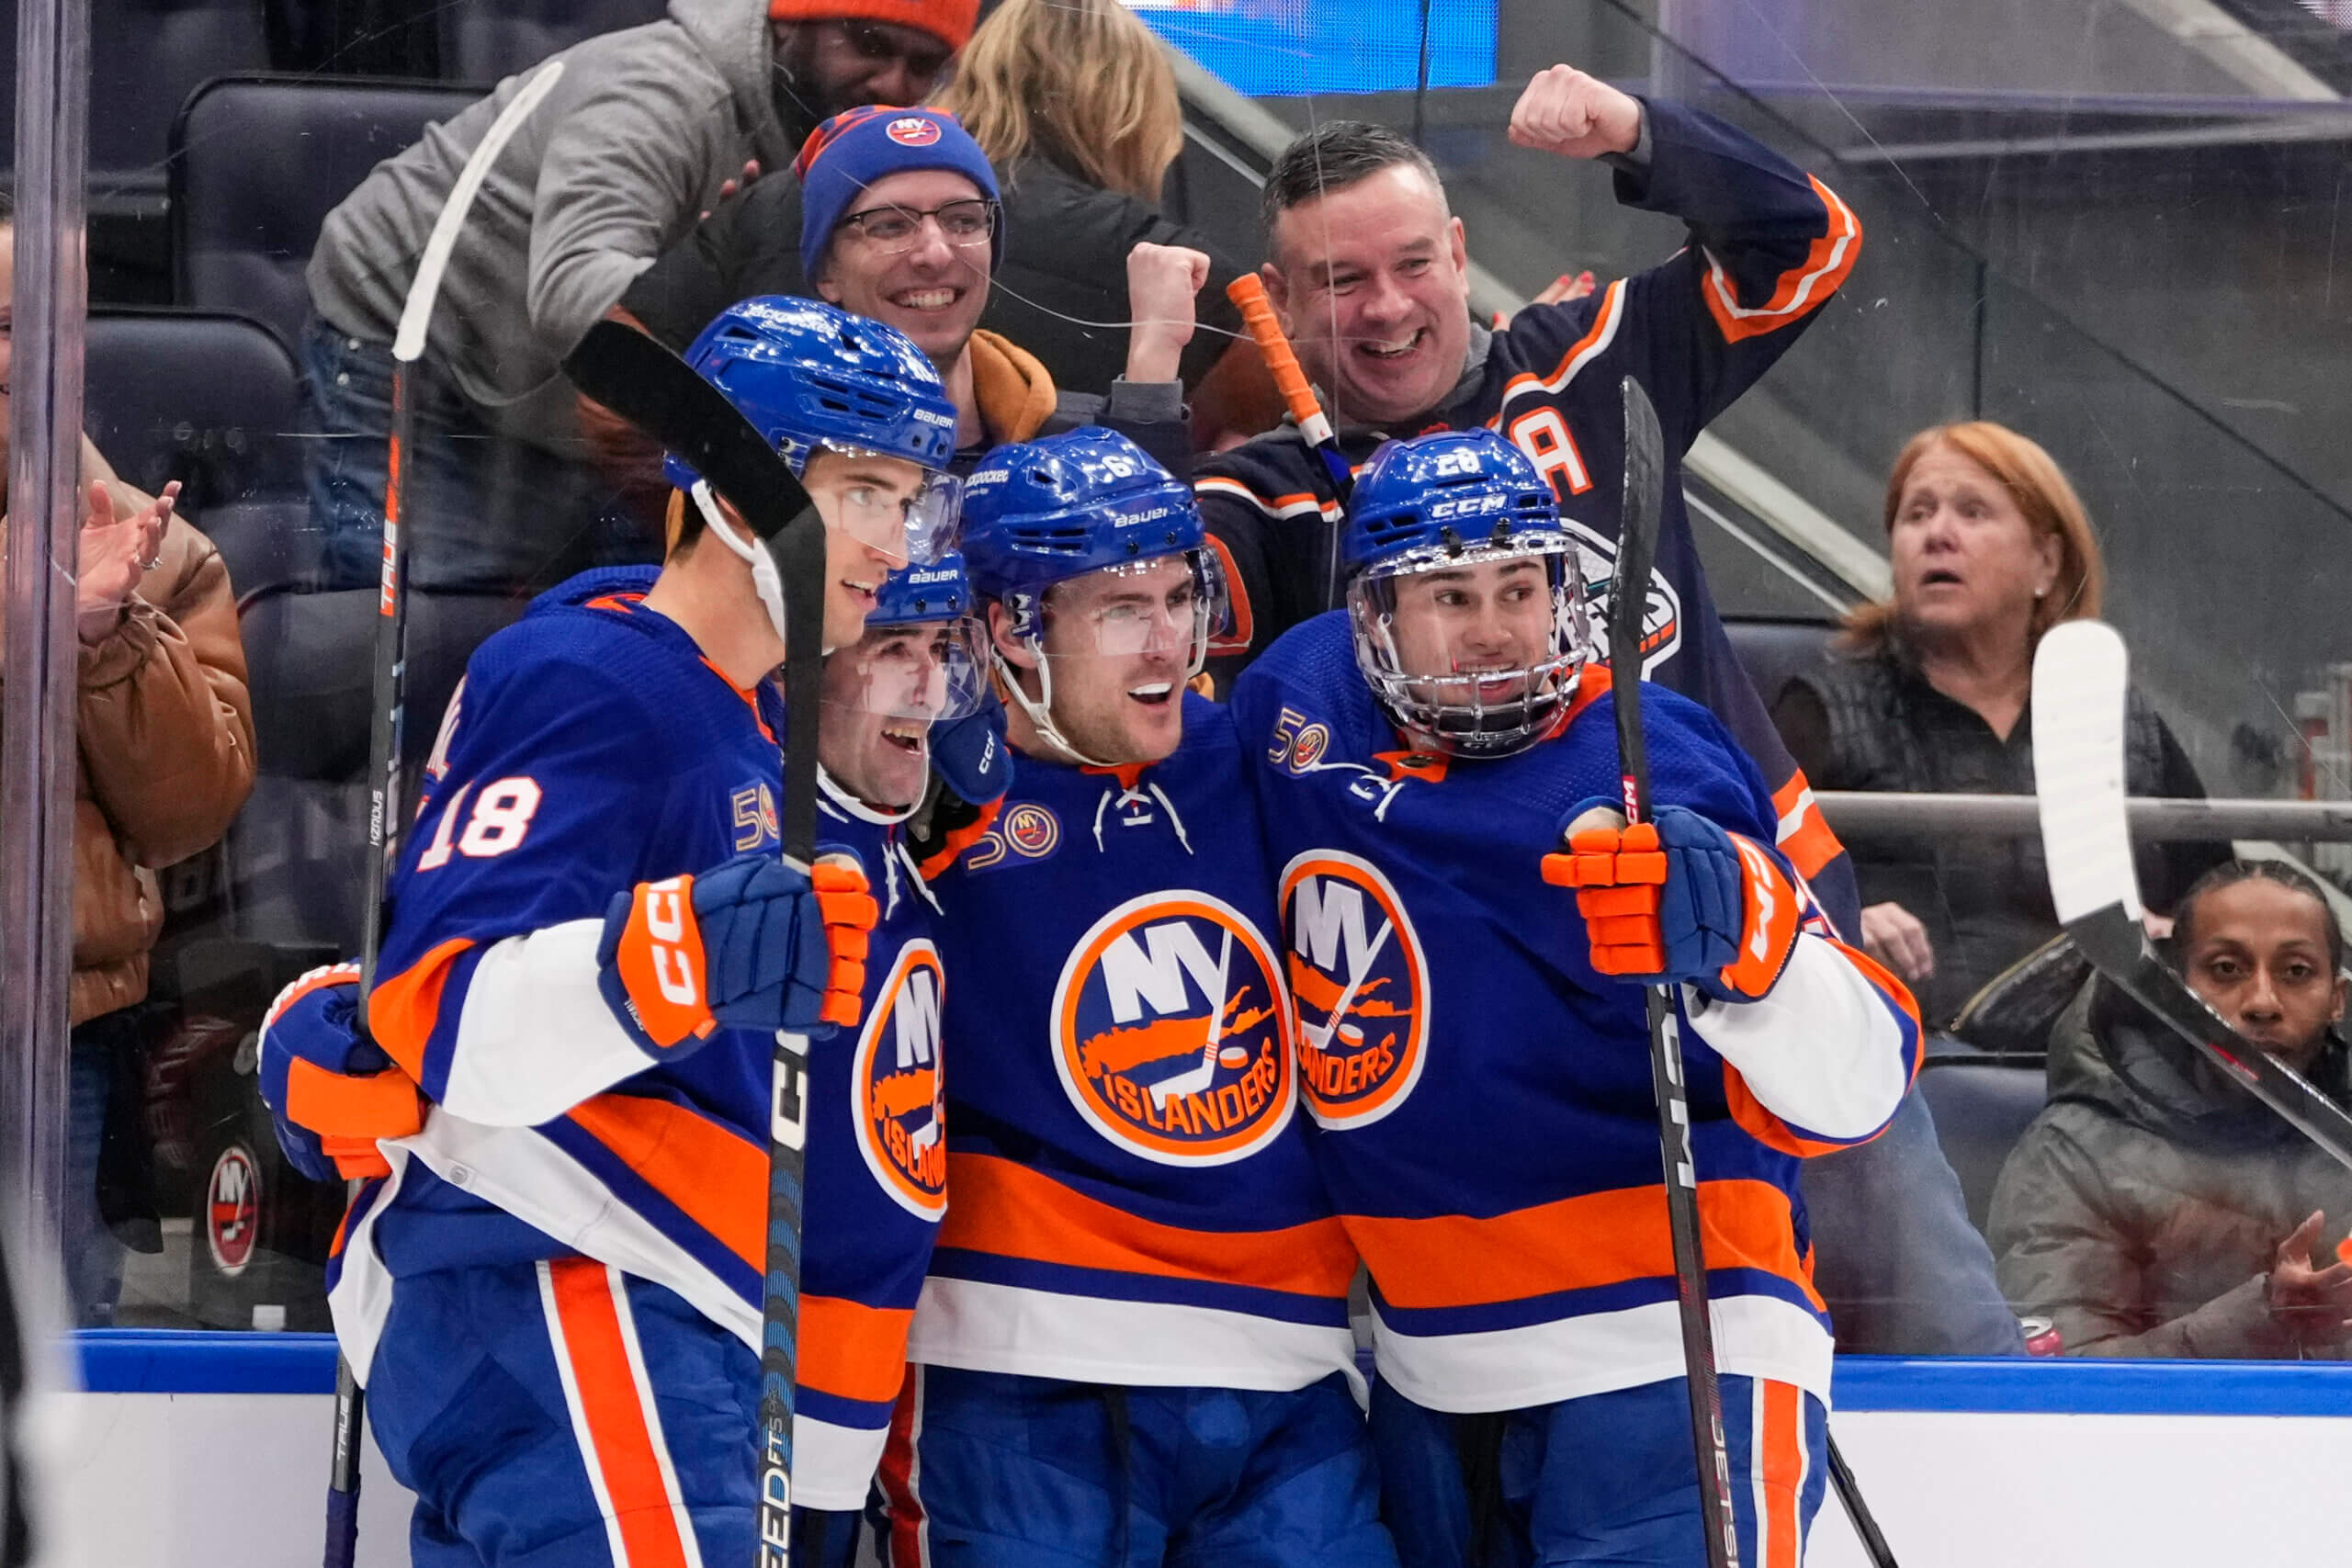 Nelson leads Isles to 4th straight win, 3-1 over Blackhawks